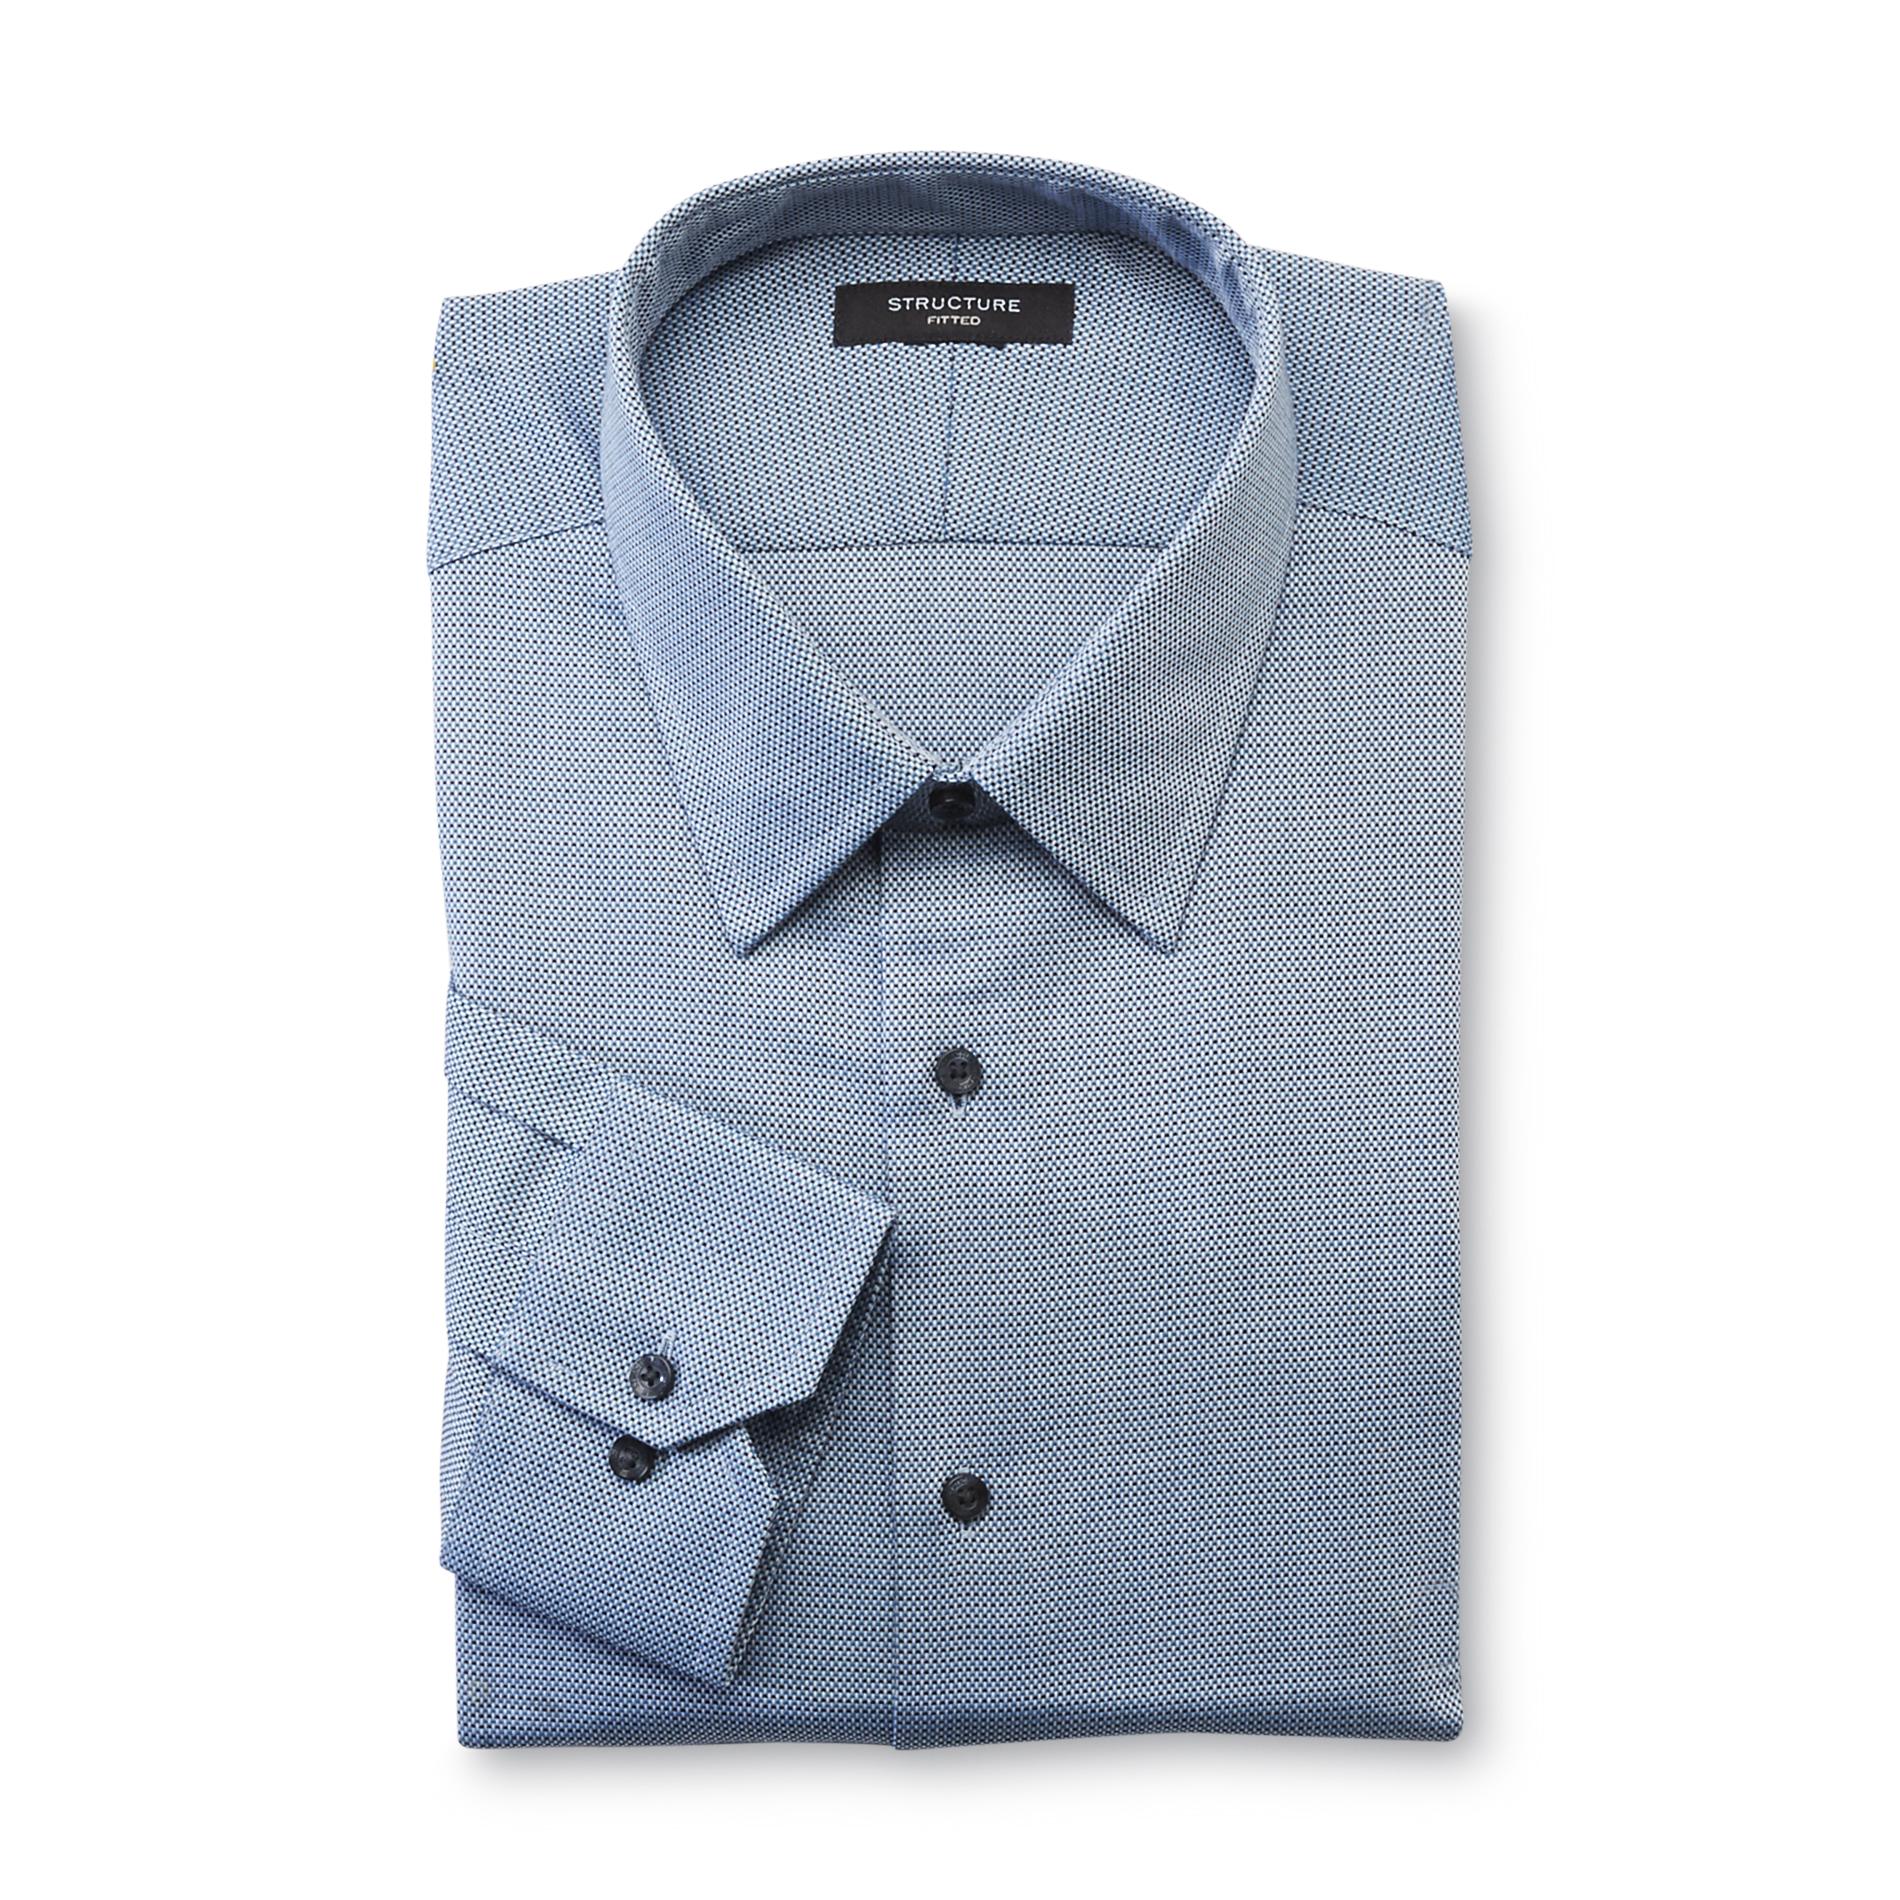 Structure Men's Fitted Wrinkle Free Dress Shirt - Textured Microcheck